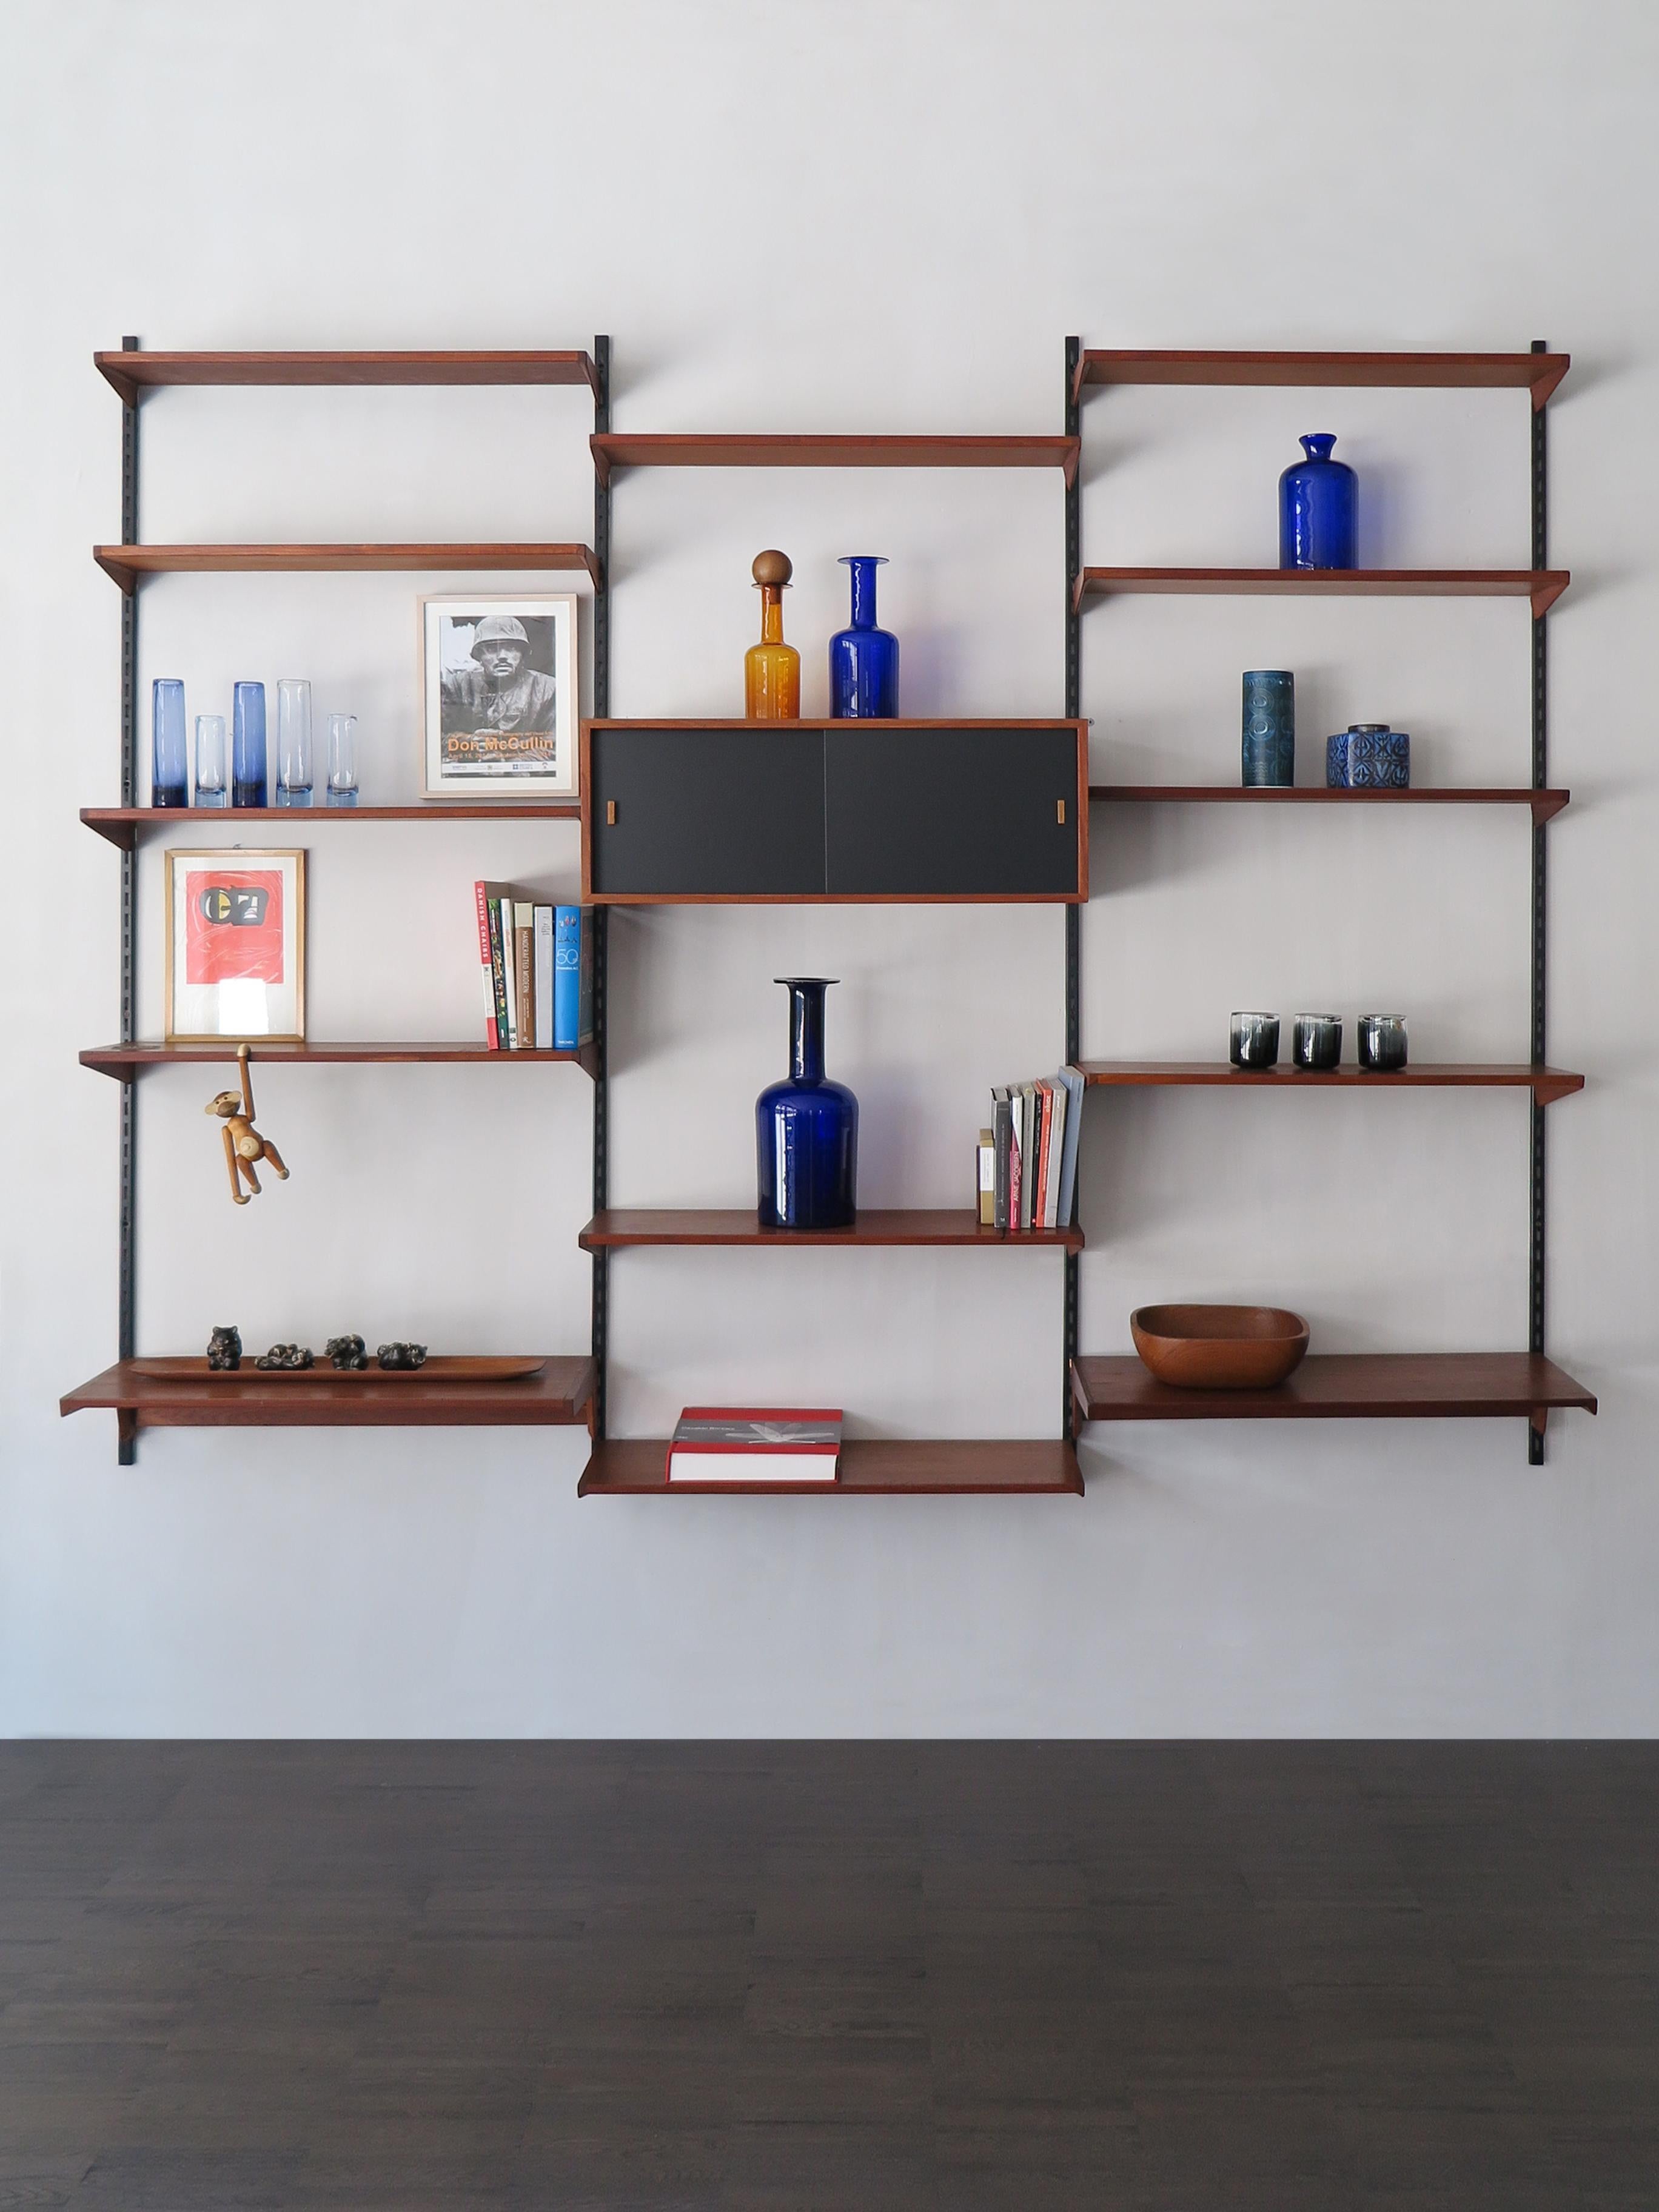 Scandinavian teak shelving system designed by danish artist Kai Kristiansen for FM Mobler, wood box and shelves can be positioned as desired; original uprights ( see photos ) and manufacture label., circa 1960.

Please note that the item is